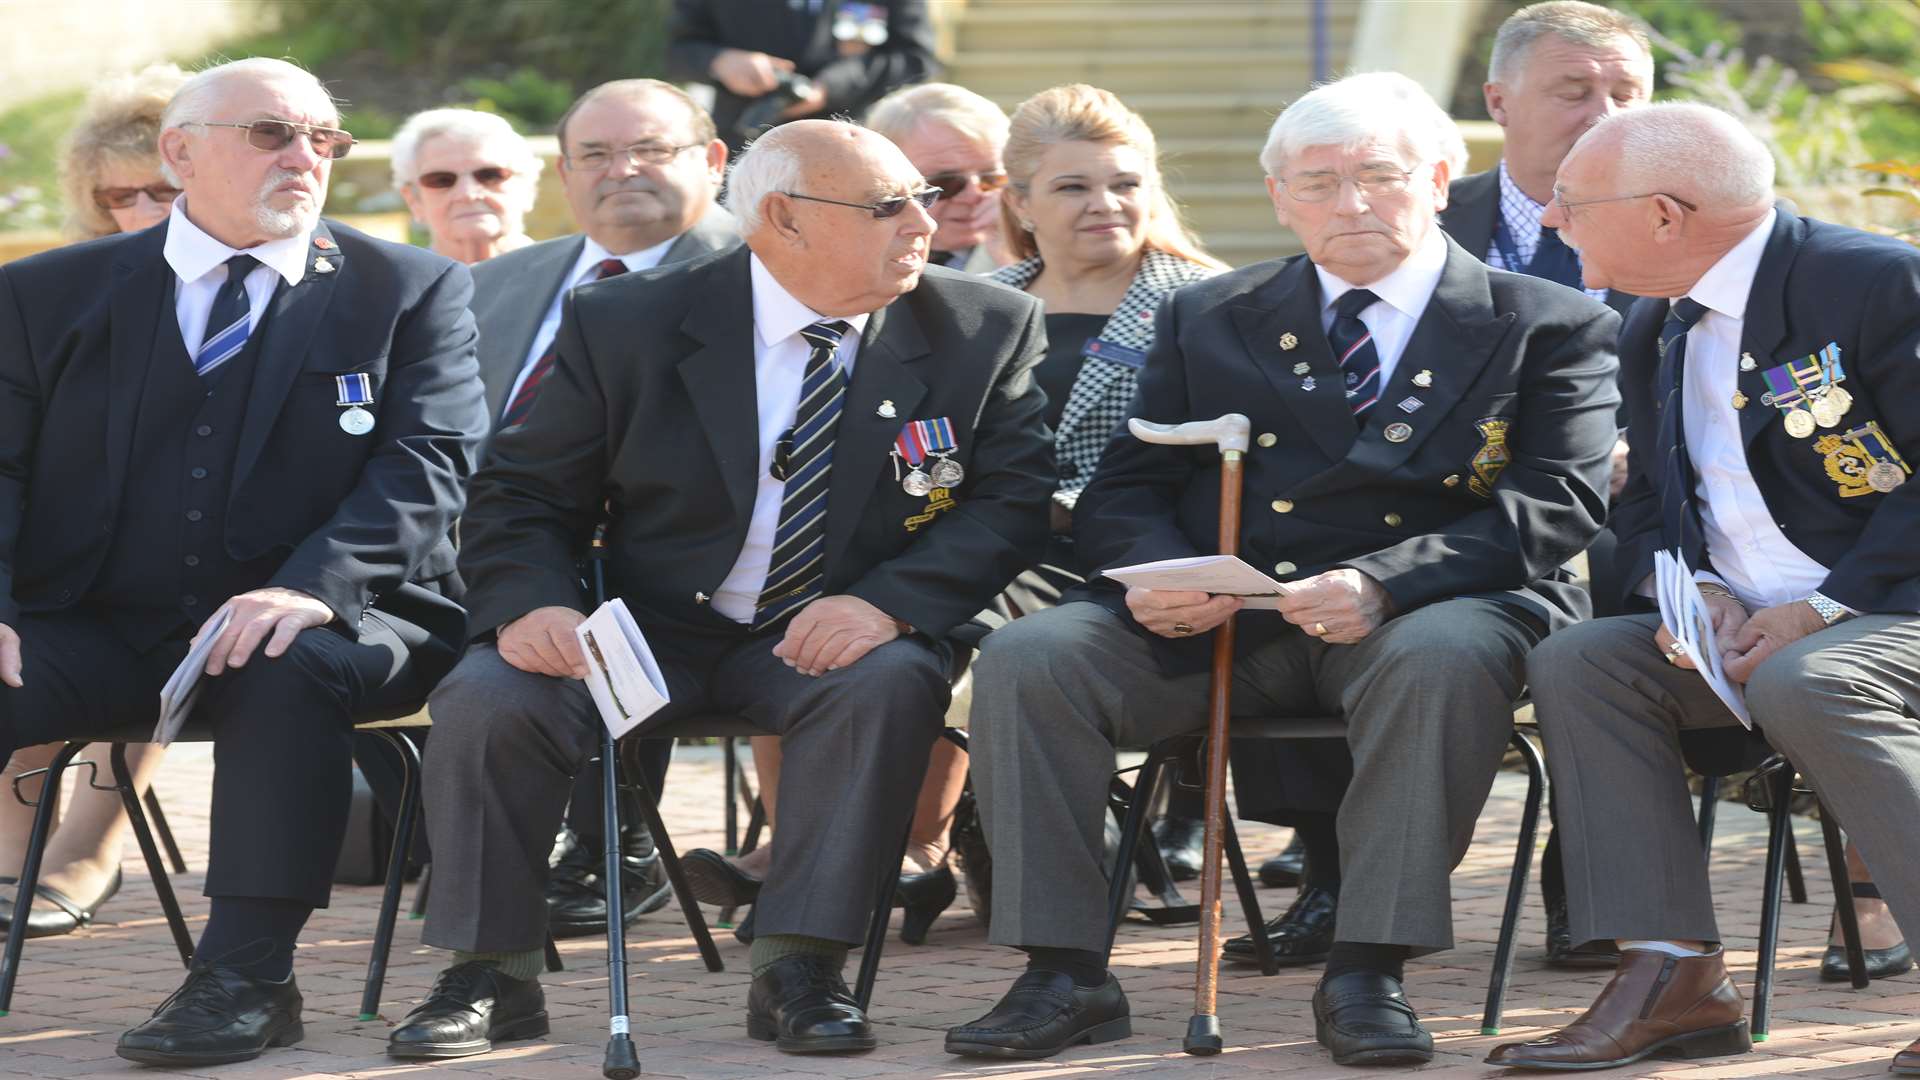 Veterans at the service